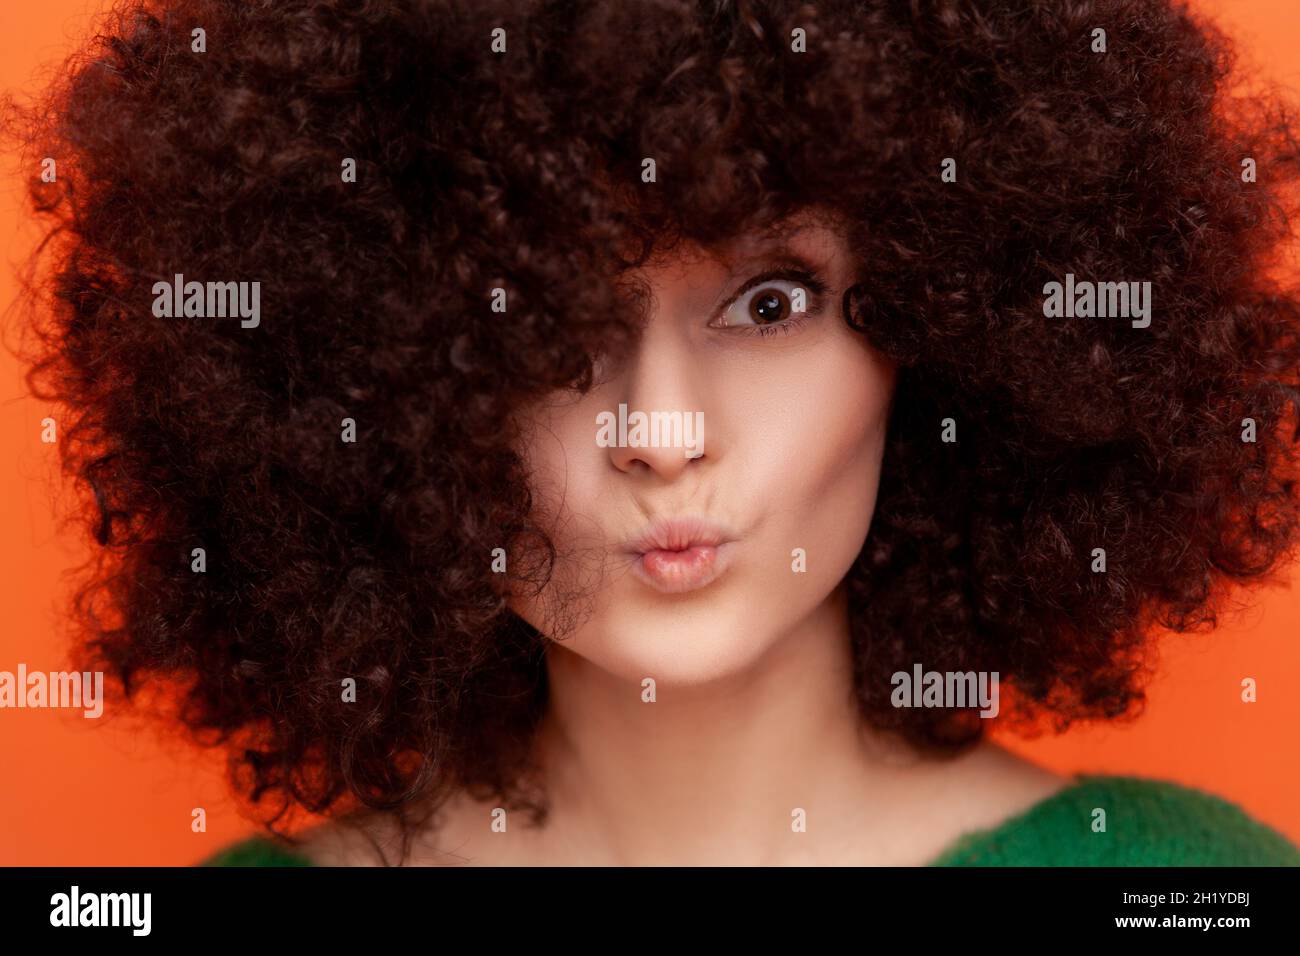 Closeup portrait of woman with Afro hairstyle looking at camera with pout lips, having perfect skin and fluffy hair, advertising beauty salon. Indoor studio shot isolated on orange background. Stock Photo